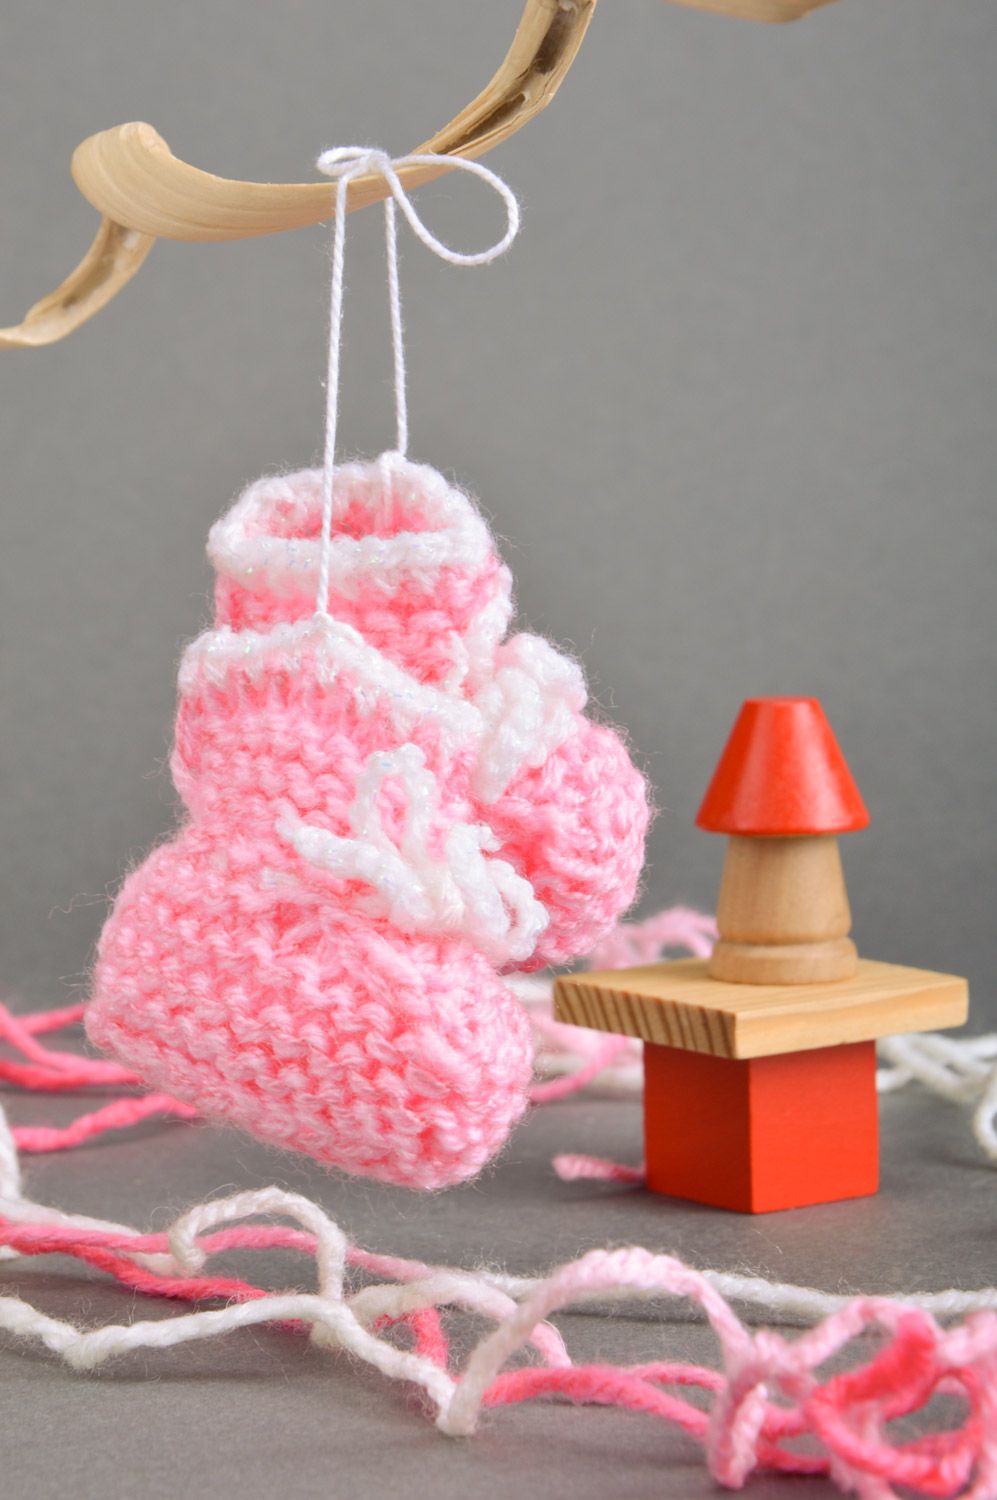 Handmade decorative wall hanging baby shoes knitted of semi-woolen pink threads photo 1